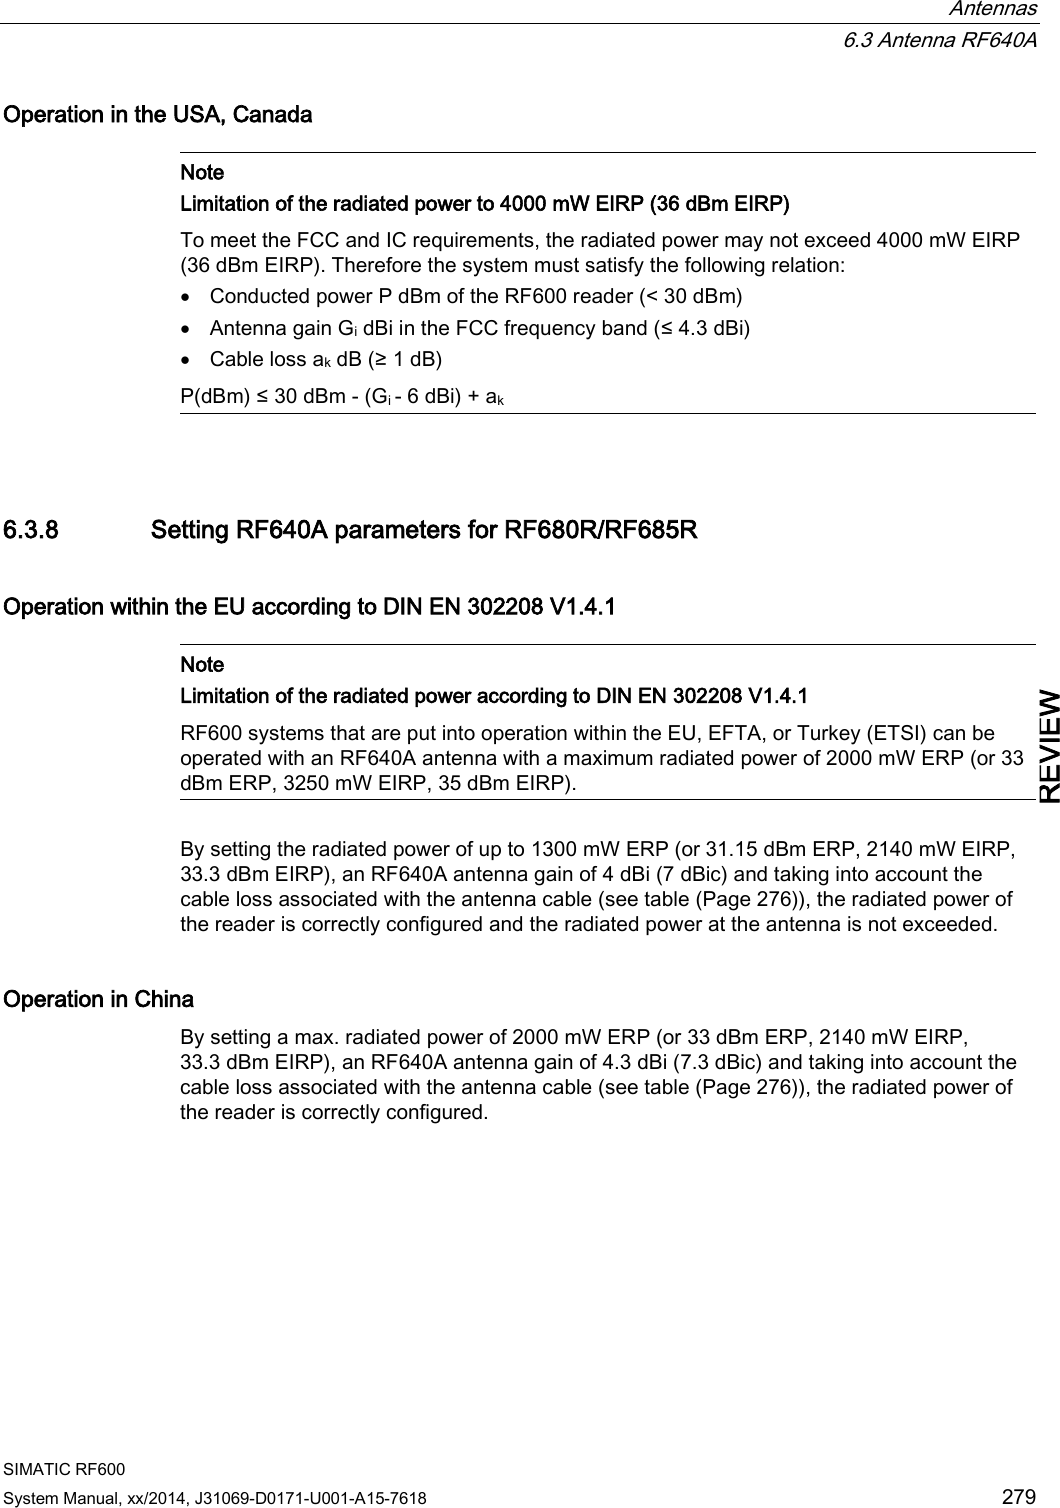  Antennas  6.3 Antenna RF640A SIMATIC RF600 System Manual, xx/2014, J31069-D0171-U001-A15-7618 279 REVIEW Operation in the USA, Canada   Note Limitation of the radiated power to 4000 mW EIRP (36 dBm EIRP) To meet the FCC and IC requirements, the radiated power may not exceed 4000 mW EIRP (36 dBm EIRP). Therefore the system must satisfy the following relation: • Conducted power P dBm of the RF600 reader (&lt; 30 dBm) • Antenna gain Gi dBi in the FCC frequency band (≤ 4.3 dBi) • Cable loss ak dB (≥ 1 dB) P(dBm) ≤ 30 dBm - (Gi - 6 dBi) + ak  6.3.8 Setting RF640A parameters for RF680R/RF685R Operation within the EU according to DIN EN 302208 V1.4.1   Note Limitation of the radiated power according to DIN EN 302208 V1.4.1 RF600 systems that are put into operation within the EU, EFTA, or Turkey (ETSI) can be operated with an RF640A antenna with a maximum radiated power of 2000 mW ERP (or 33 dBm ERP, 3250 mW EIRP, 35 dBm EIRP).  By setting the radiated power of up to 1300 mW ERP (or 31.15 dBm ERP, 2140 mW EIRP, 33.3 dBm EIRP), an RF640A antenna gain of 4 dBi (7 dBic) and taking into account the cable loss associated with the antenna cable (see table (Page 276)), the radiated power of the reader is correctly configured and the radiated power at the antenna is not exceeded. Operation in China By setting a max. radiated power of 2000 mW ERP (or 33 dBm ERP, 2140 mW EIRP, 33.3 dBm EIRP), an RF640A antenna gain of 4.3 dBi (7.3 dBic) and taking into account the cable loss associated with the antenna cable (see table (Page 276)), the radiated power of the reader is correctly configured. 